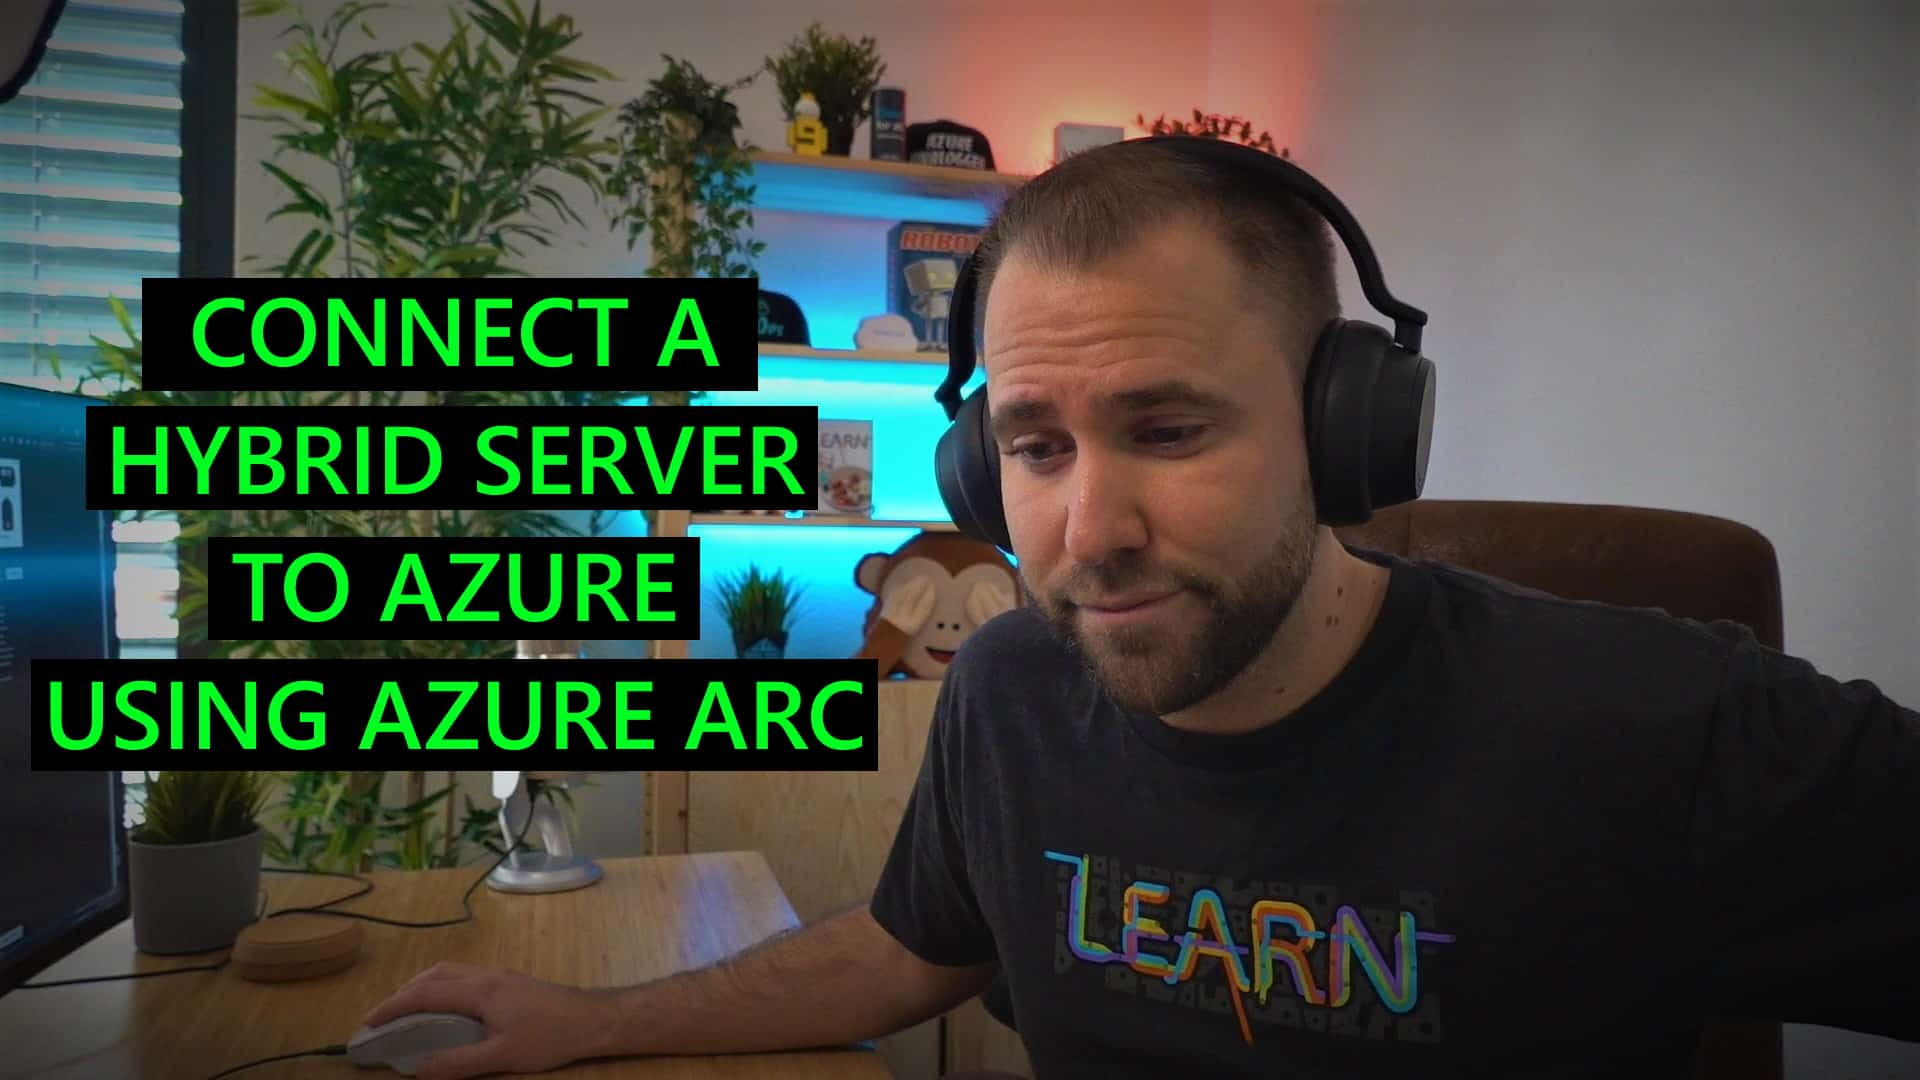 Connect a hybrid server to Azure using Azure Arc